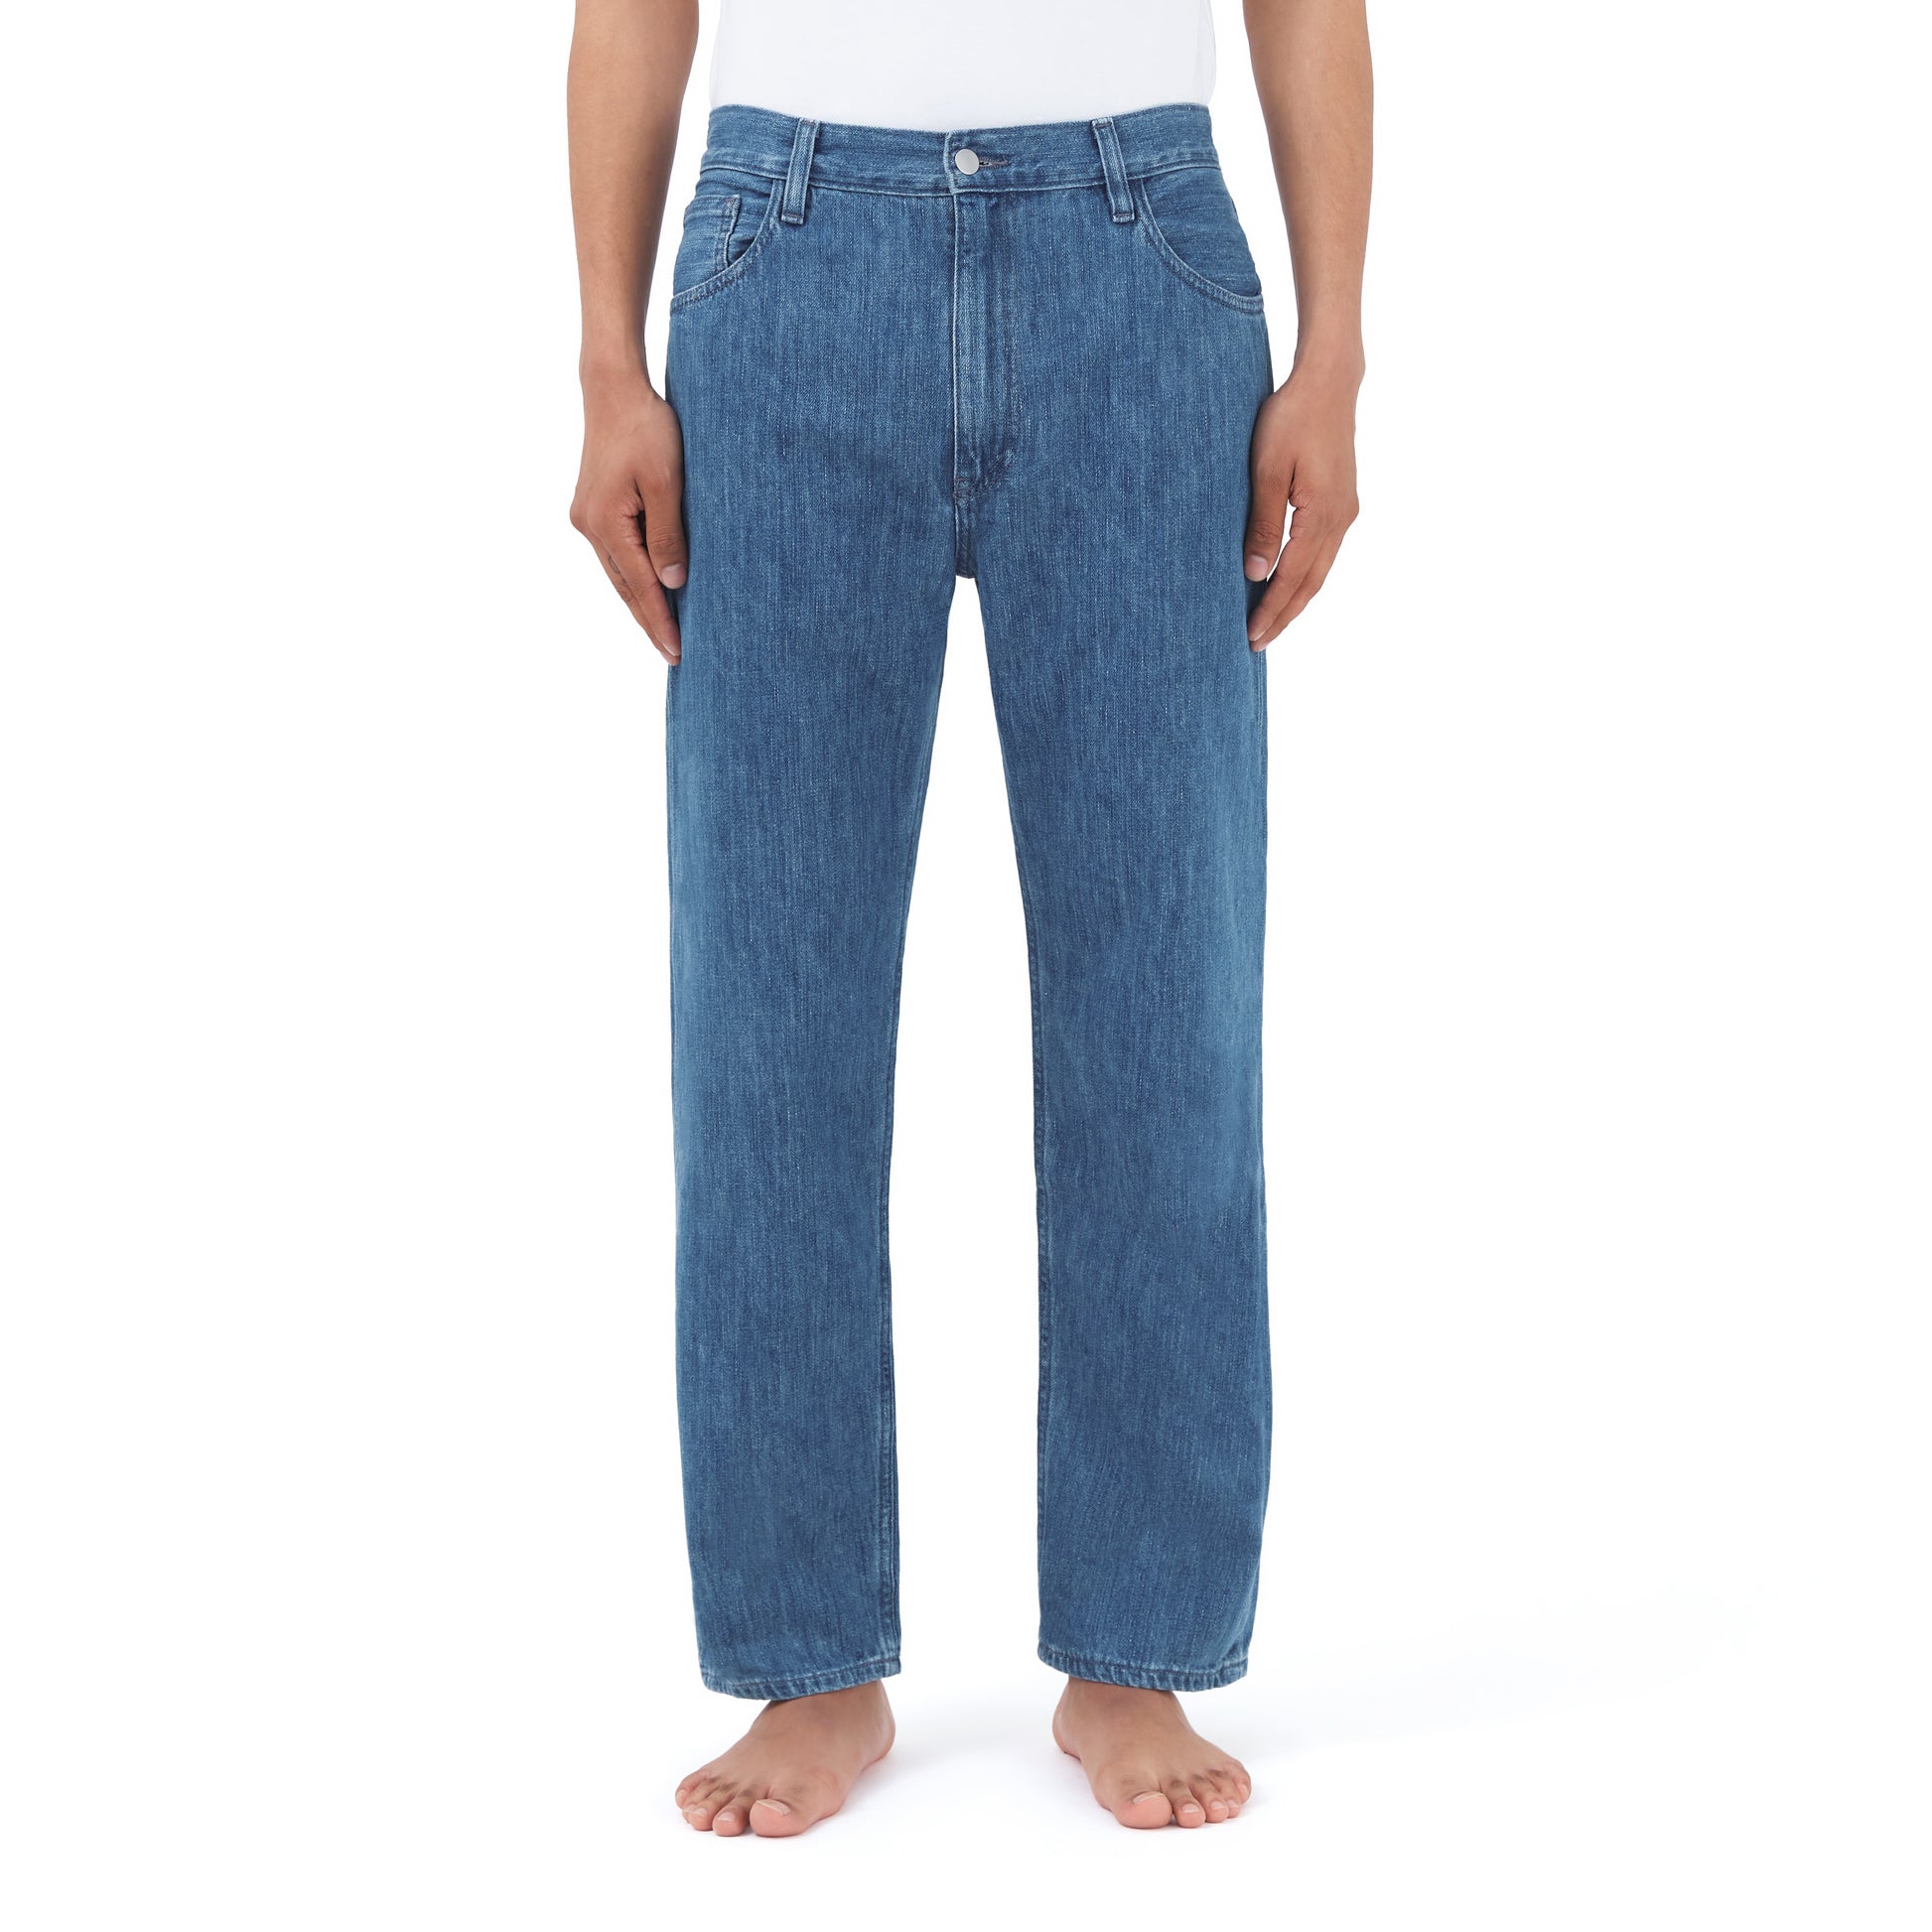 Relaxed Fit Organic Jean in Eco Stone Wash Selvedge Denim – non